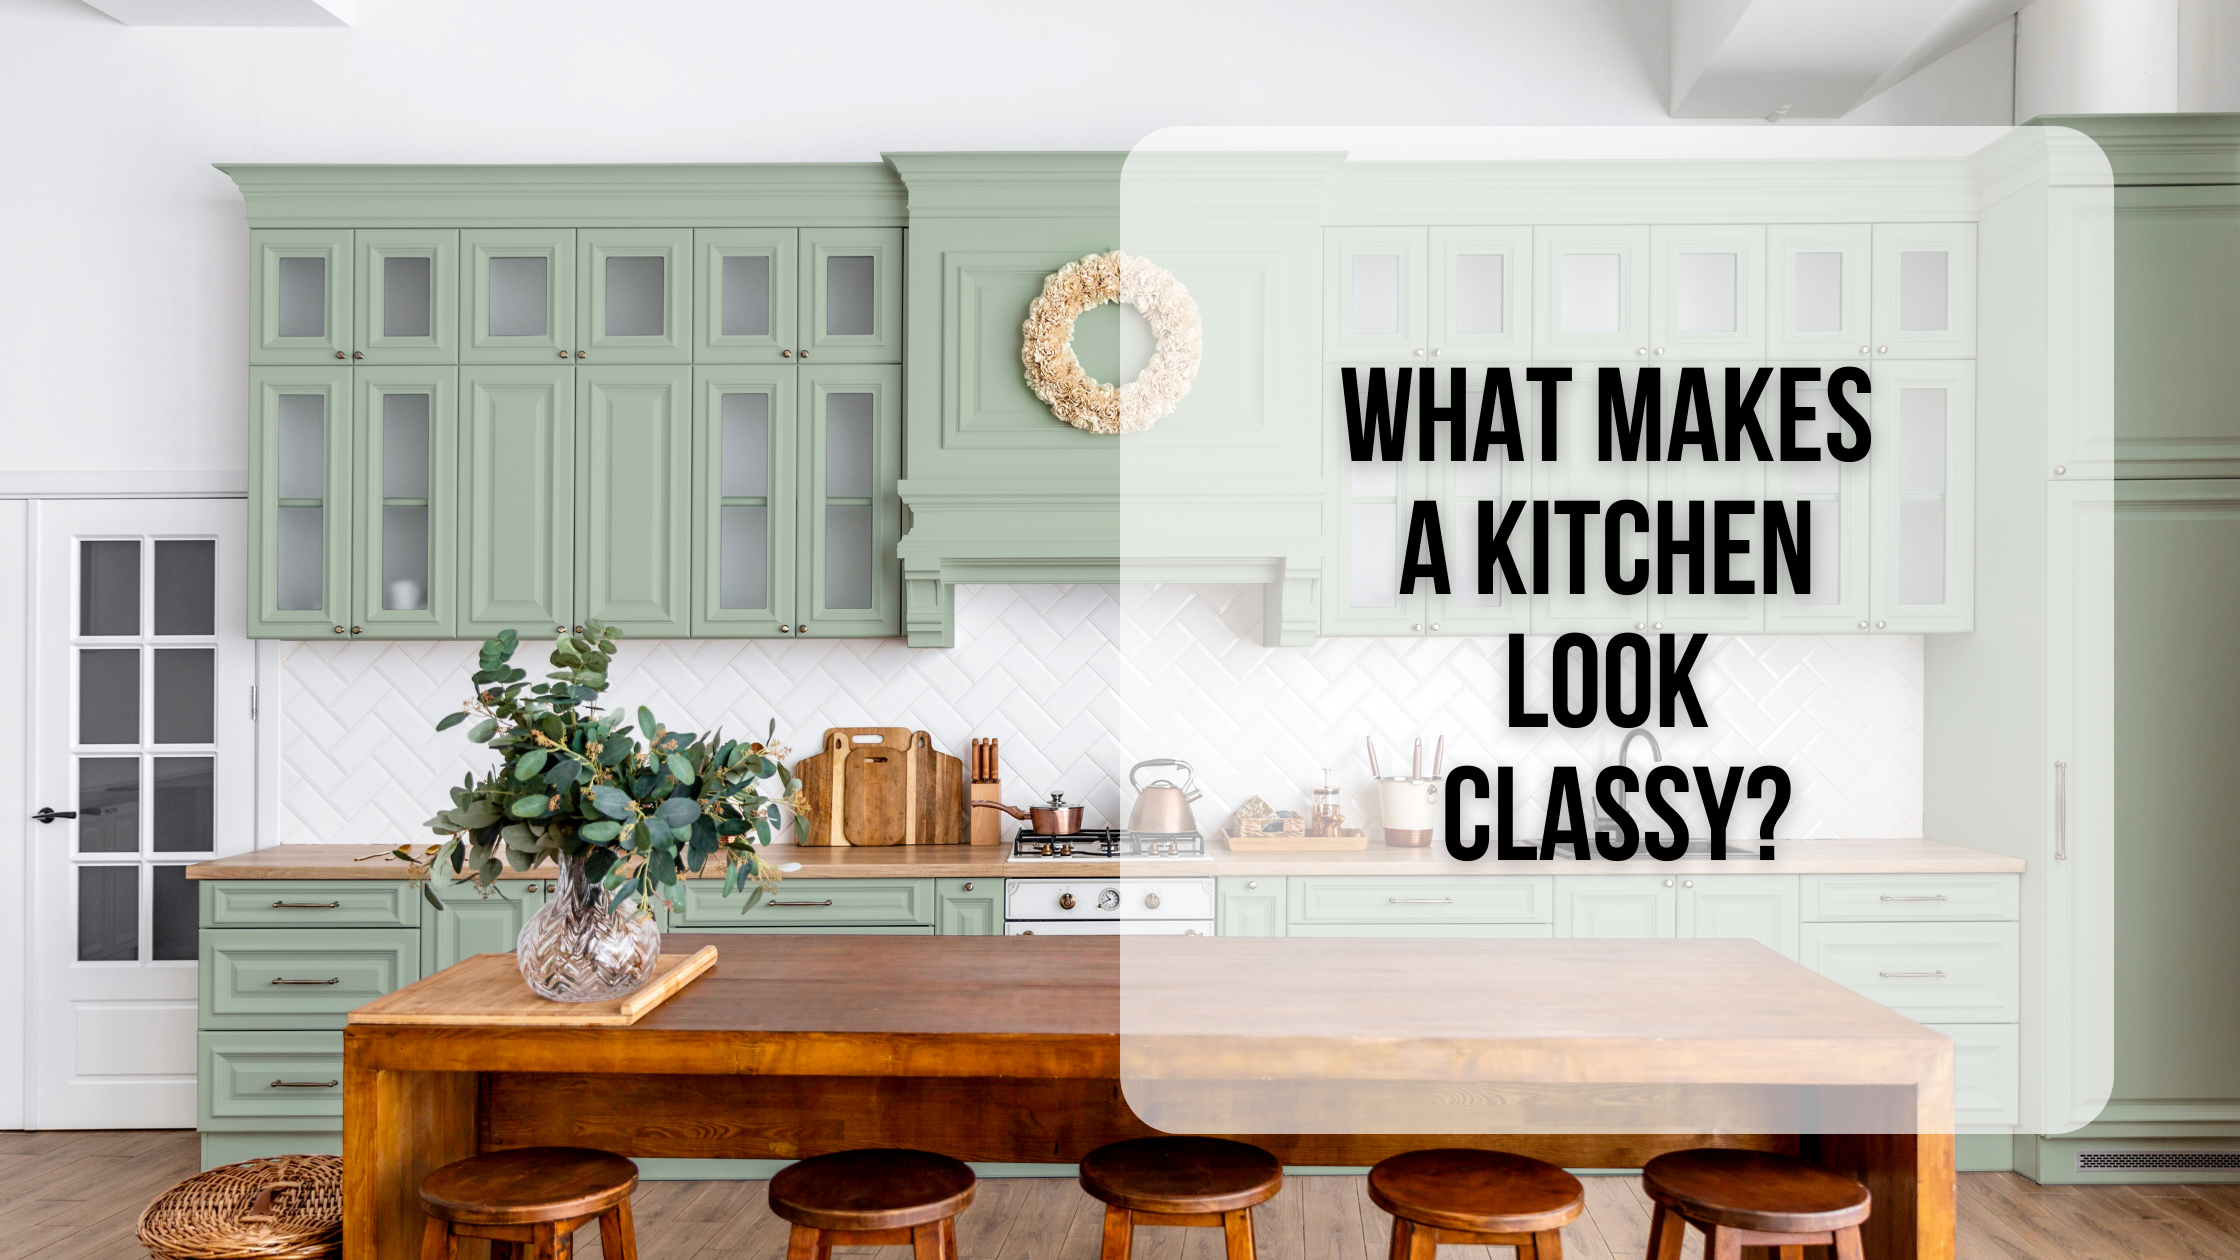 What makes a kitchen look classy